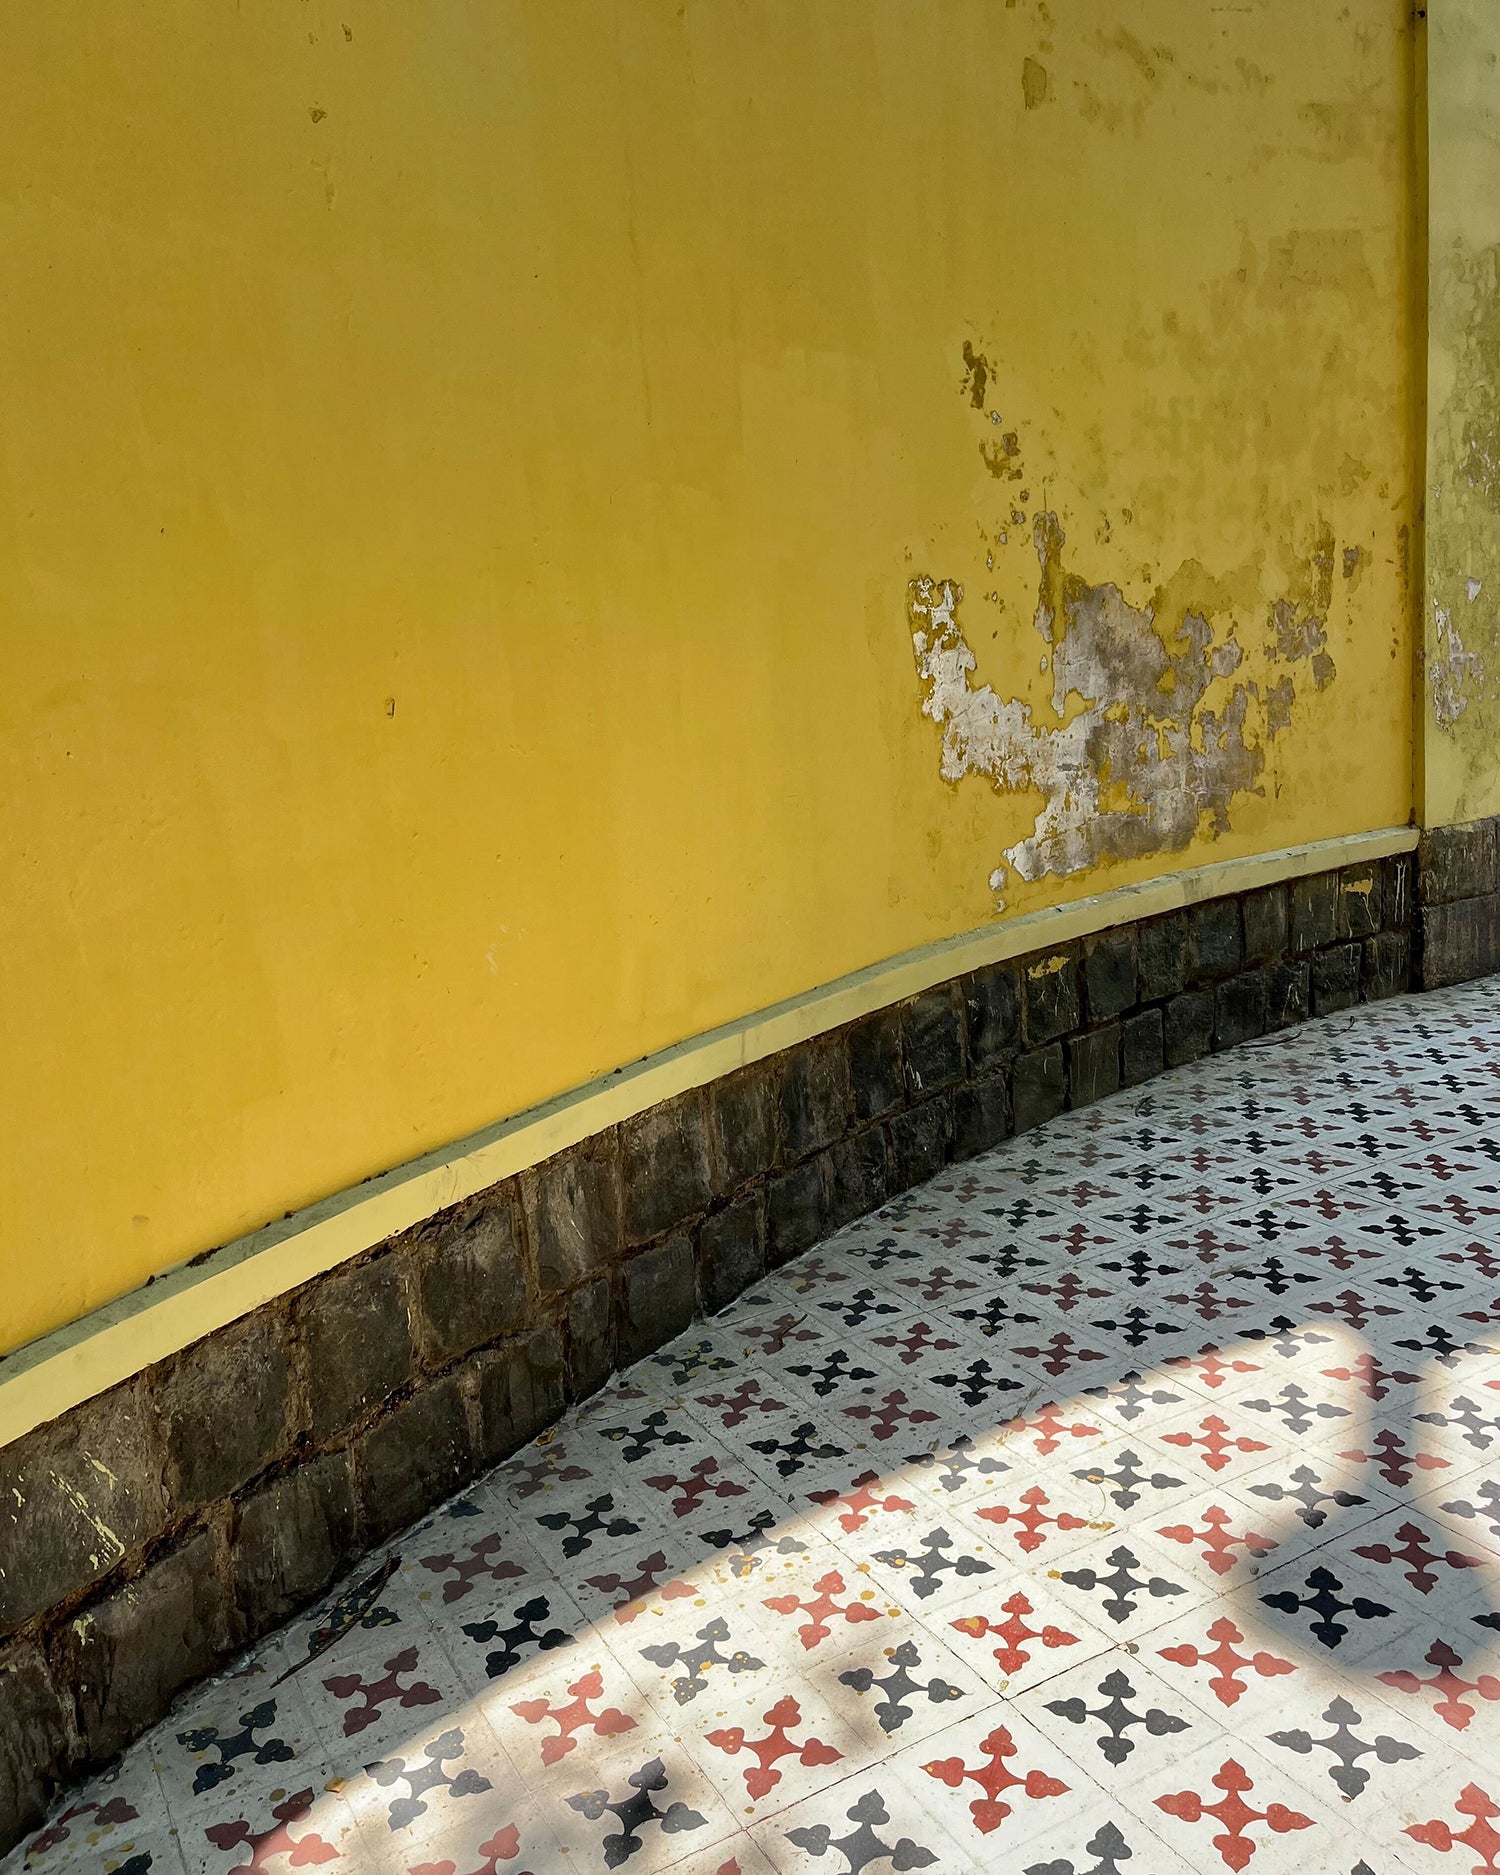 A bright yellow wall above a tile floor with a navy, red and white pattern.